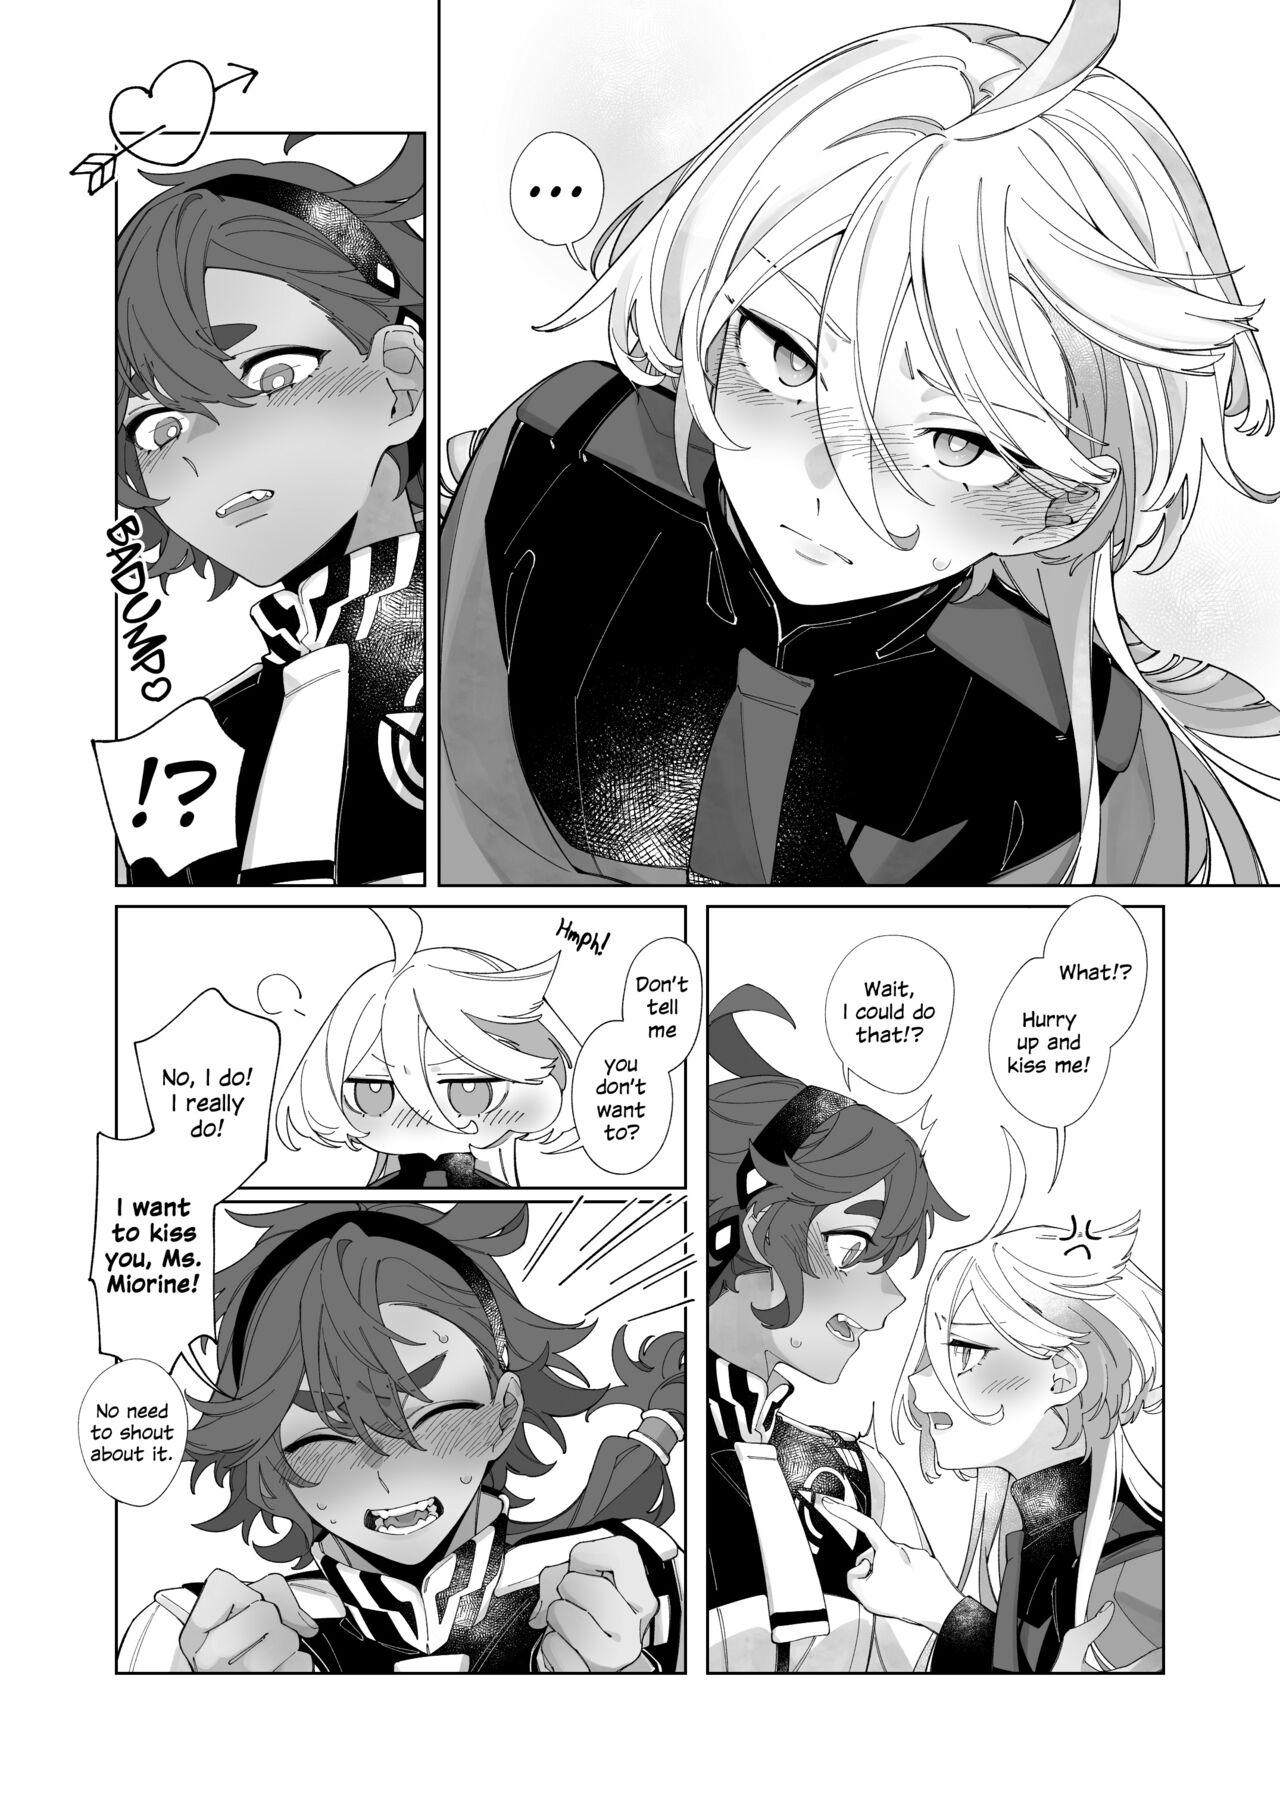 Couch Kiss no Ato Nani ga Shitai? | After Kissing, What Else Do You Want to Do? - Mobile suit gundam the witch from mercury Step - Page 5